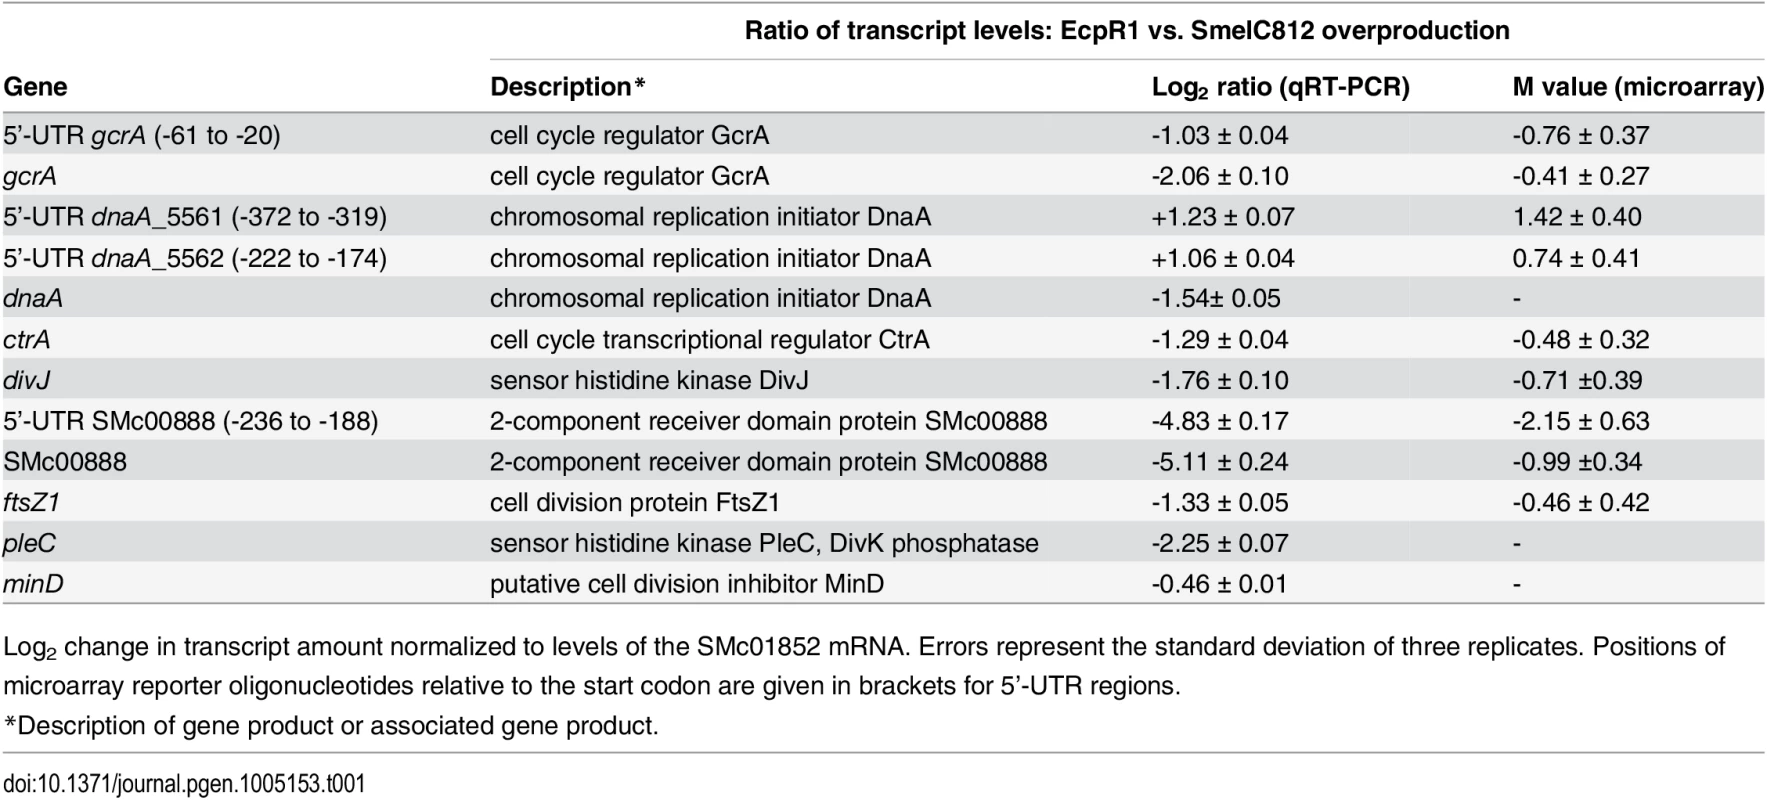 qRT-PCR based verification of putative EcpR1 target genes displaying changes in transcript levels upon overproduction of EcpR1 as detected by global transcriptome profiling.